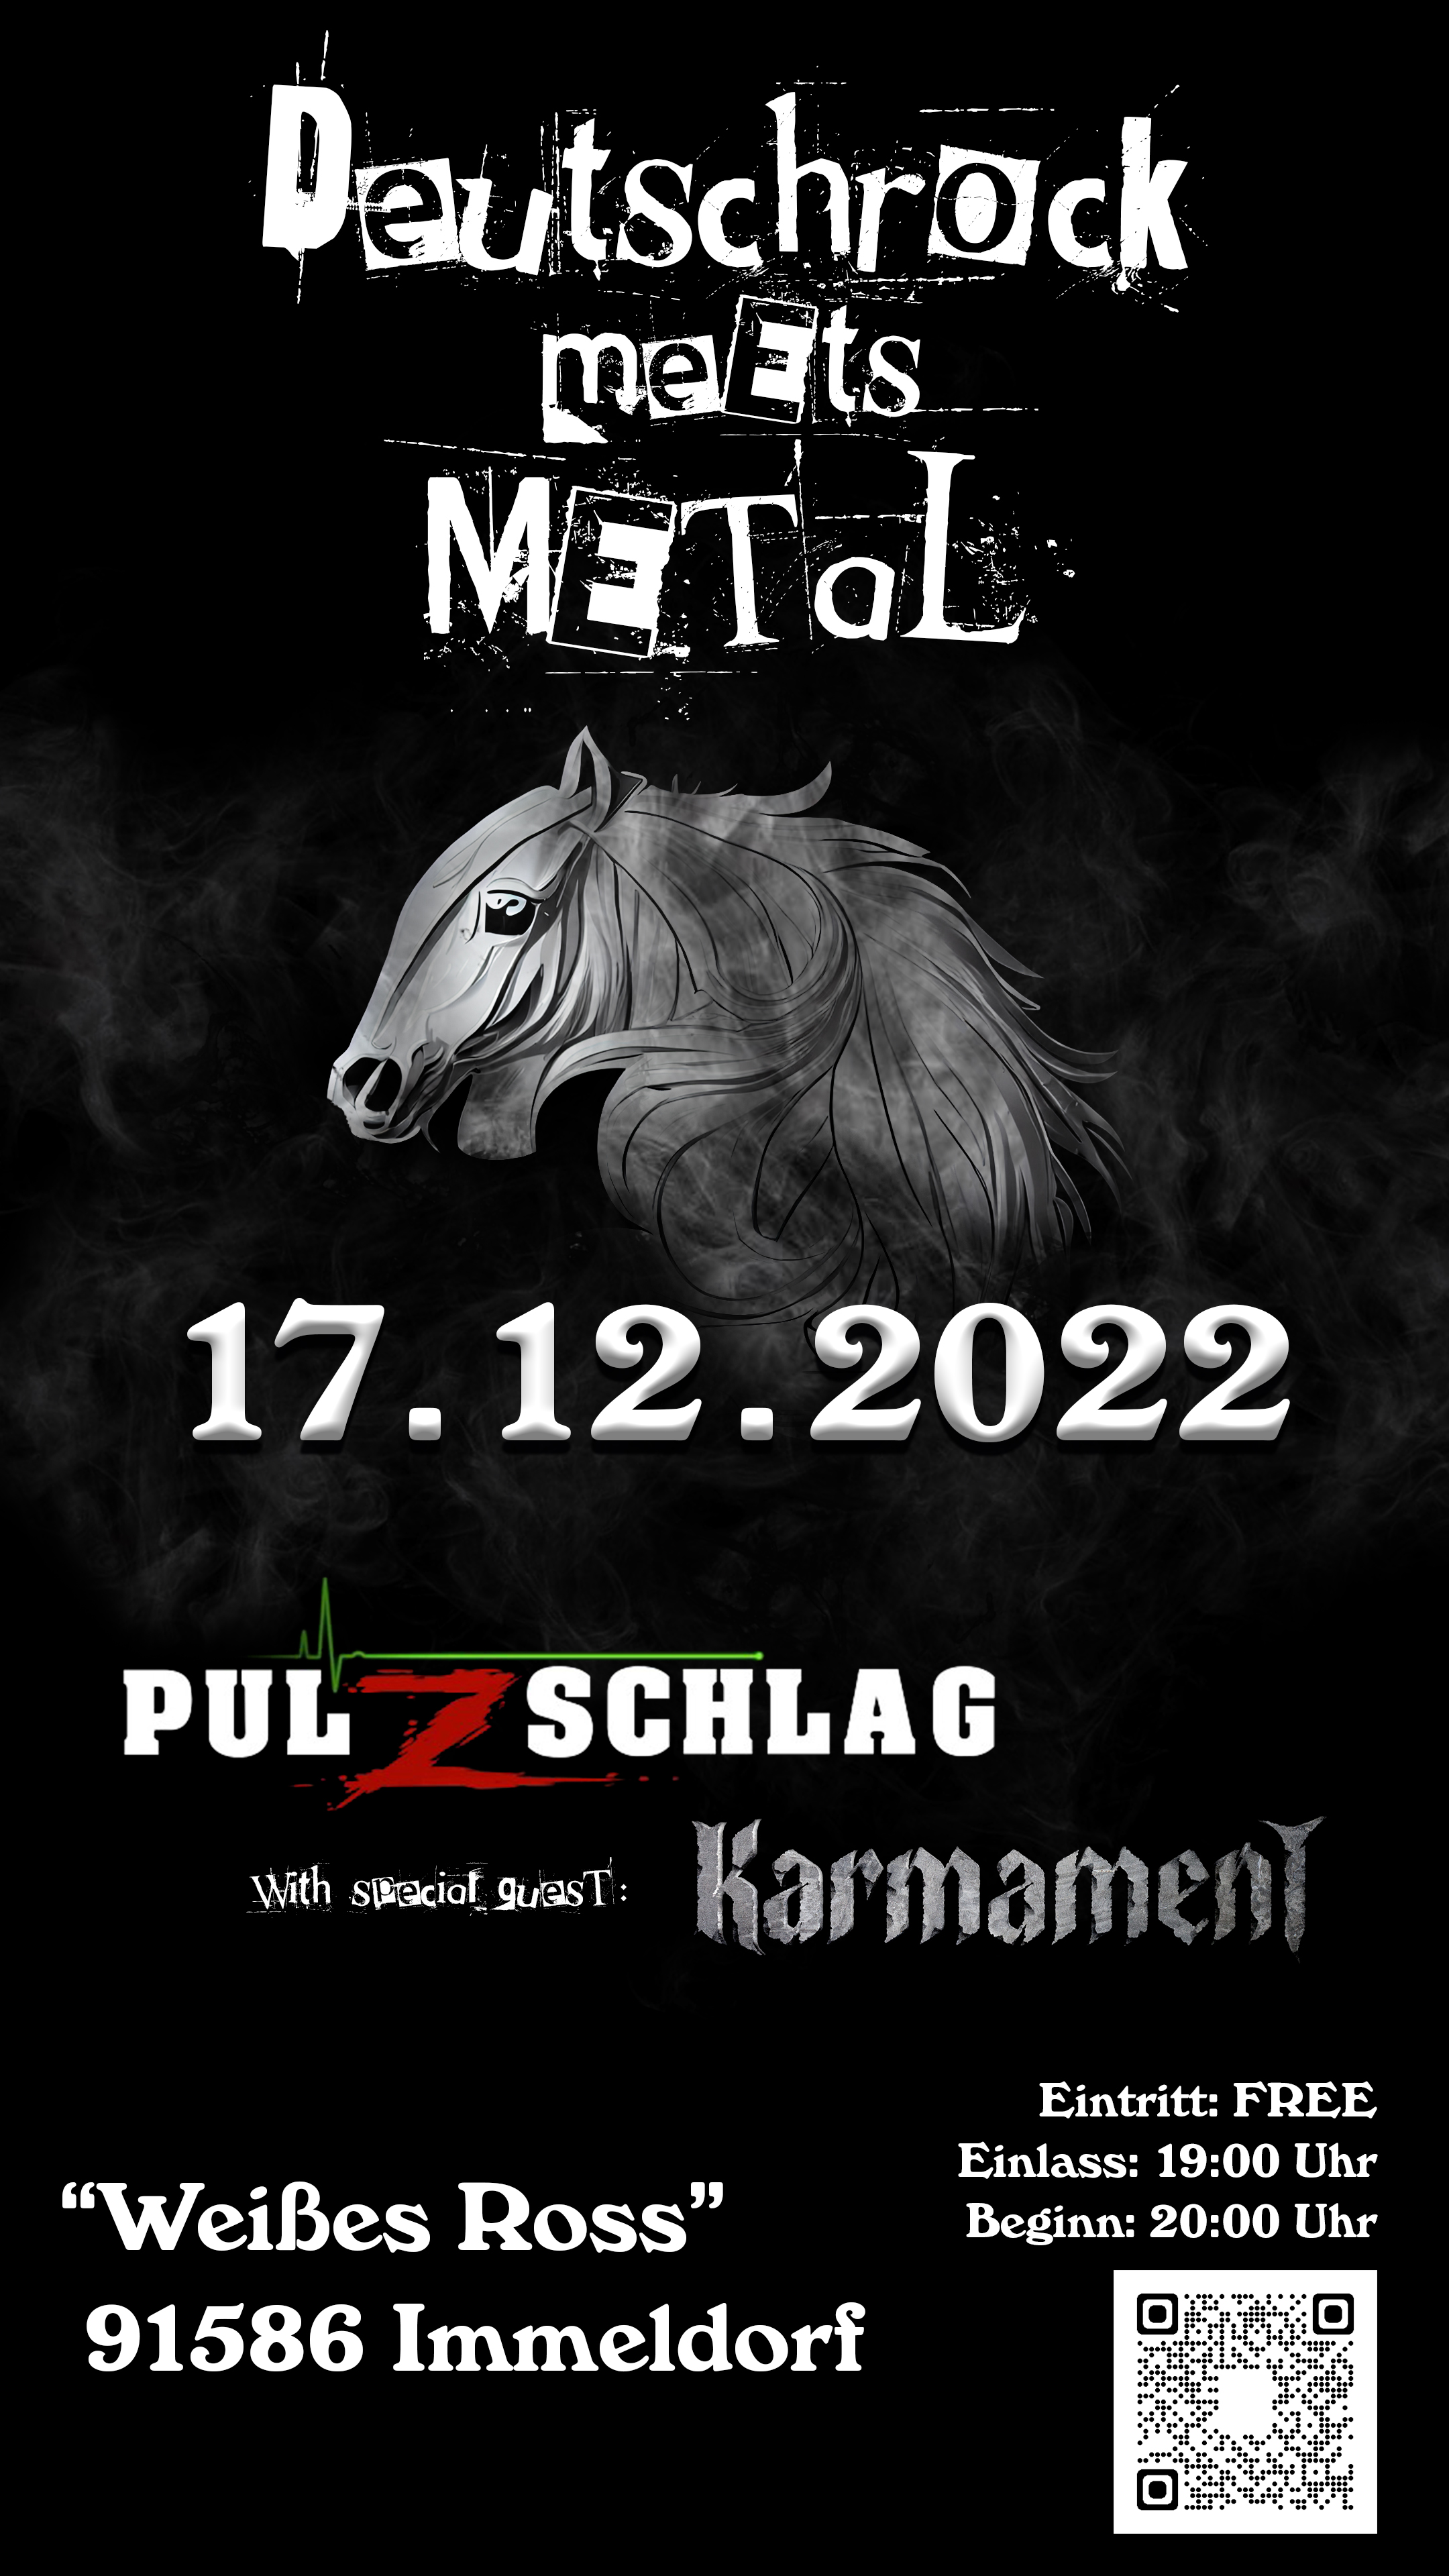 Gig Poster for the 17th of December 2022 - Pulzschlag and Karmament at the"Weißes Ross" in 91586 Immeldorf